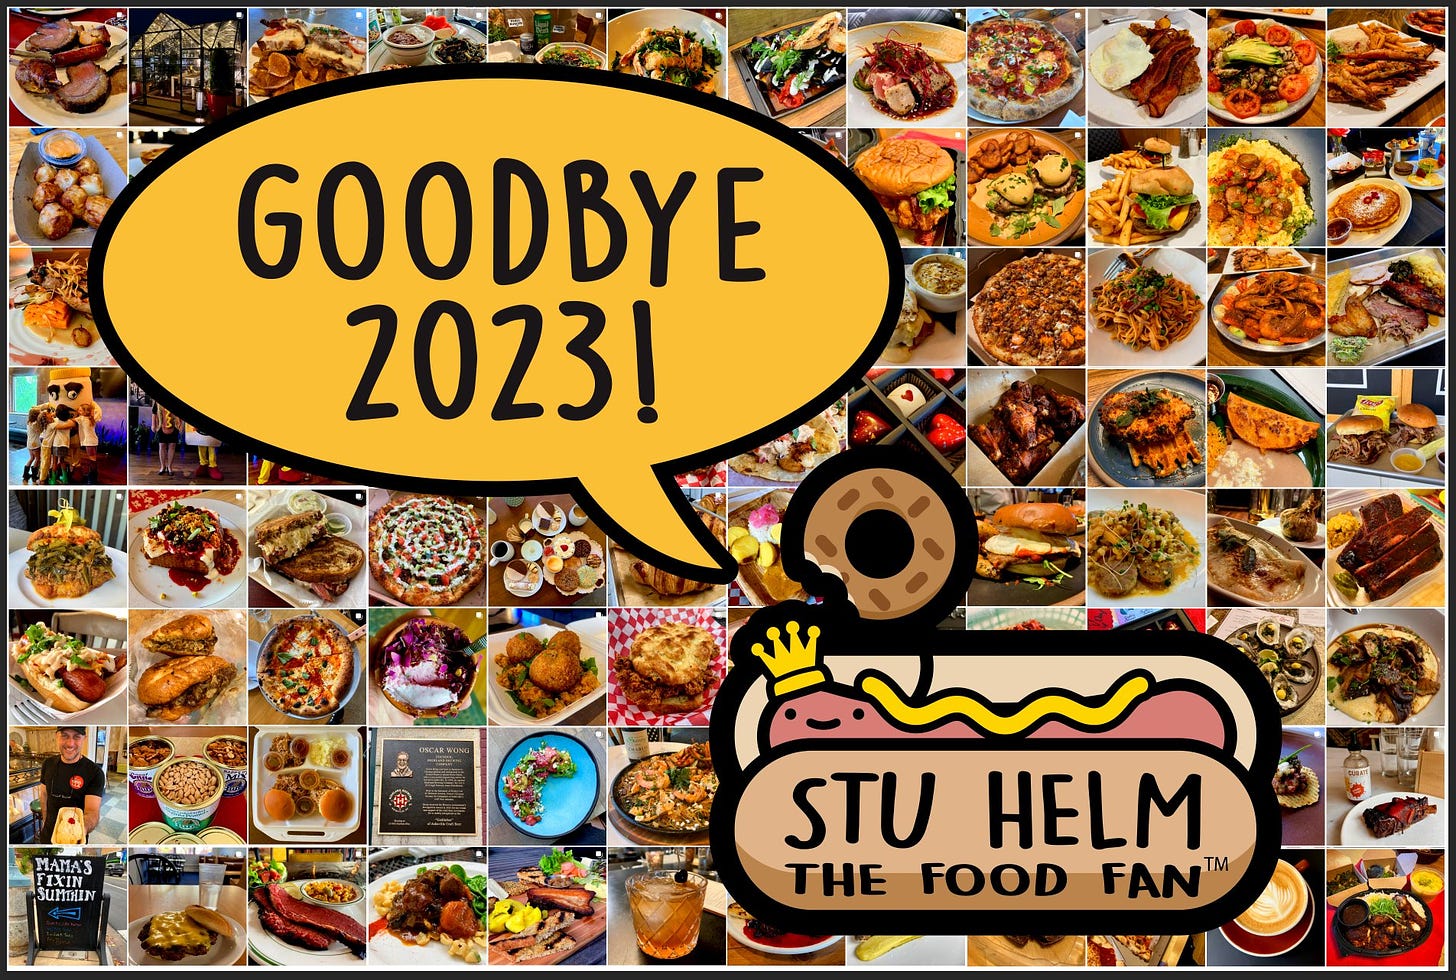 May be an image of chow mein and text that says 'GOODBYE 2023! MAMA'S FIXIN SUMHHIN STU HELM THE FOOD FAN'